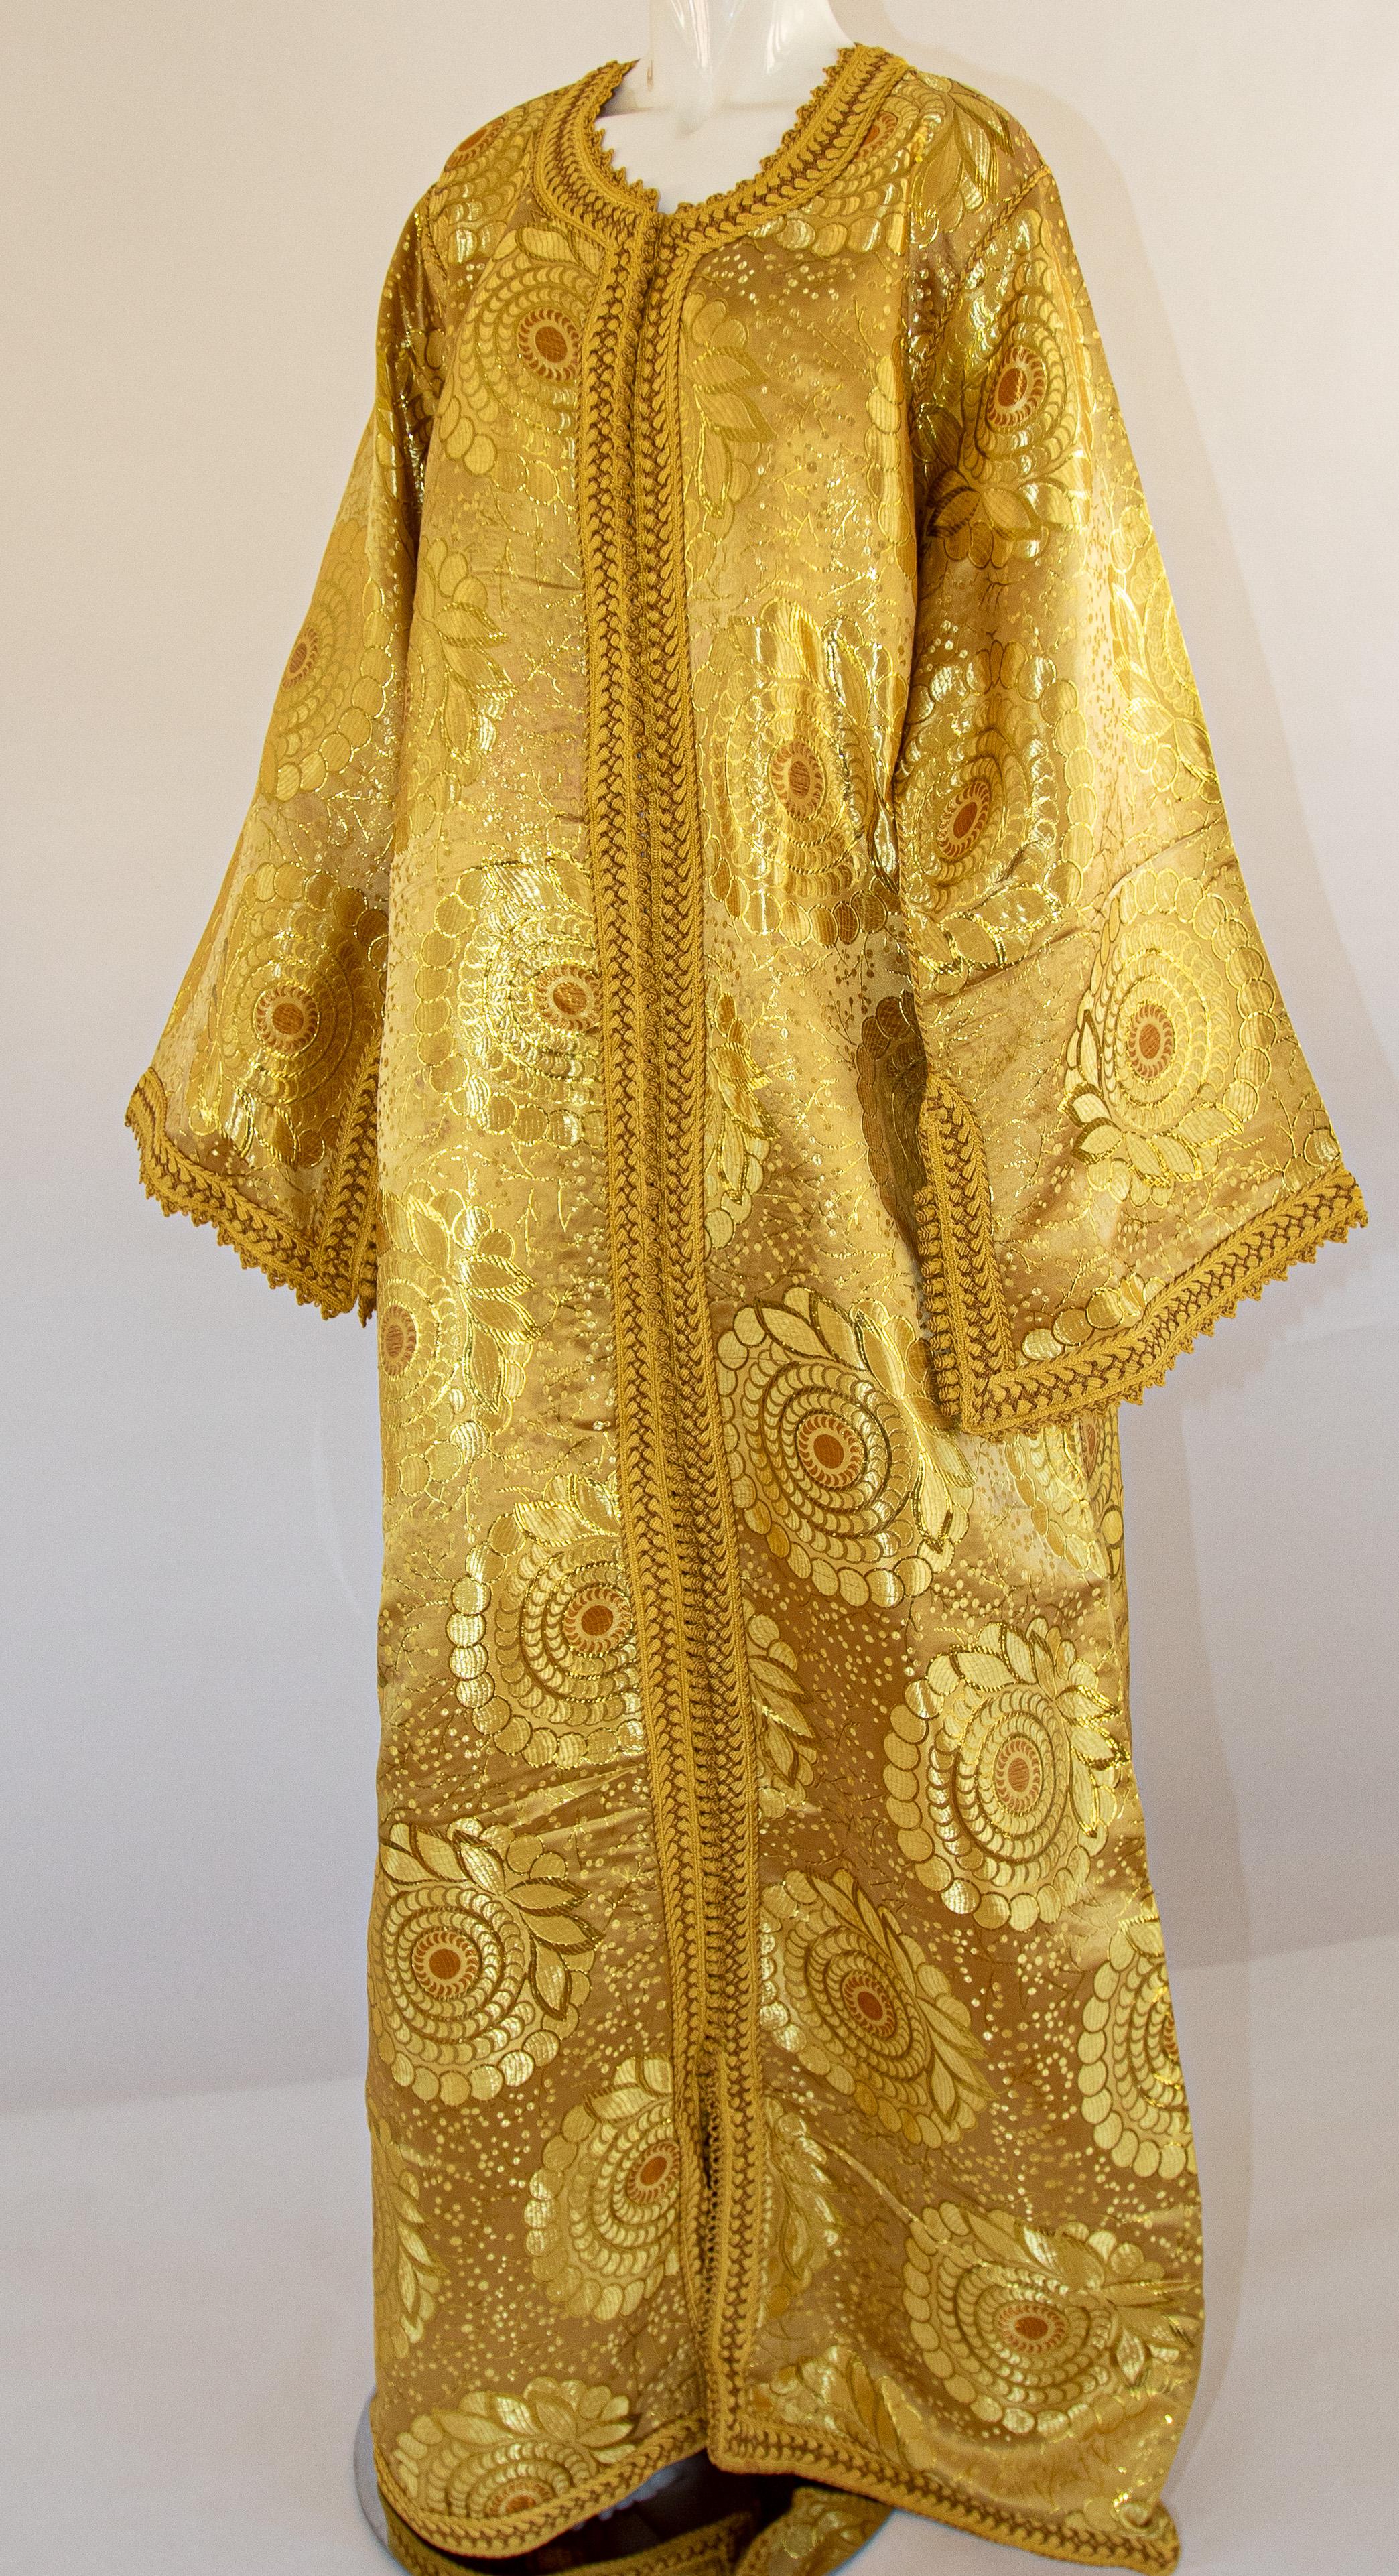 Moroccan vintage exotic metallic gold brocade caftan gown, circa 1970s.
The luxurious Moorish kaftan is designed with brilliant gold metallic brocade.
The front of the elegant caftan gown is embellished at the front with woven gold buttons and loops